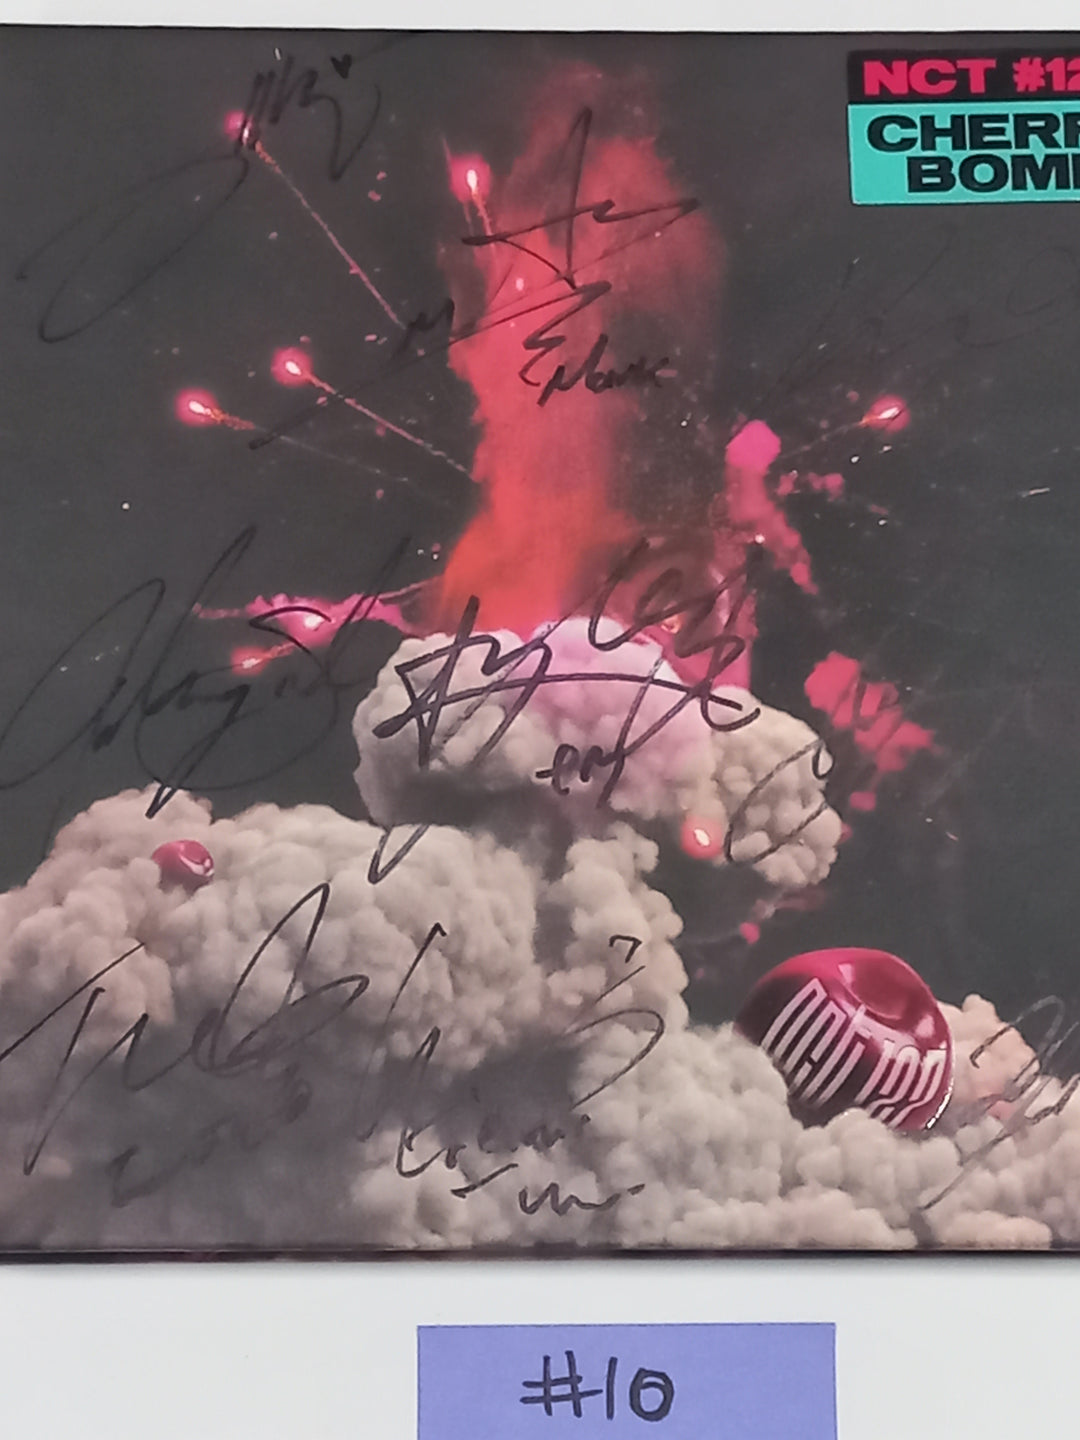 Nct, Nct 127, Nct Dream, WayV - Hand Autographed(Signed) Promo Album [24.3.22]